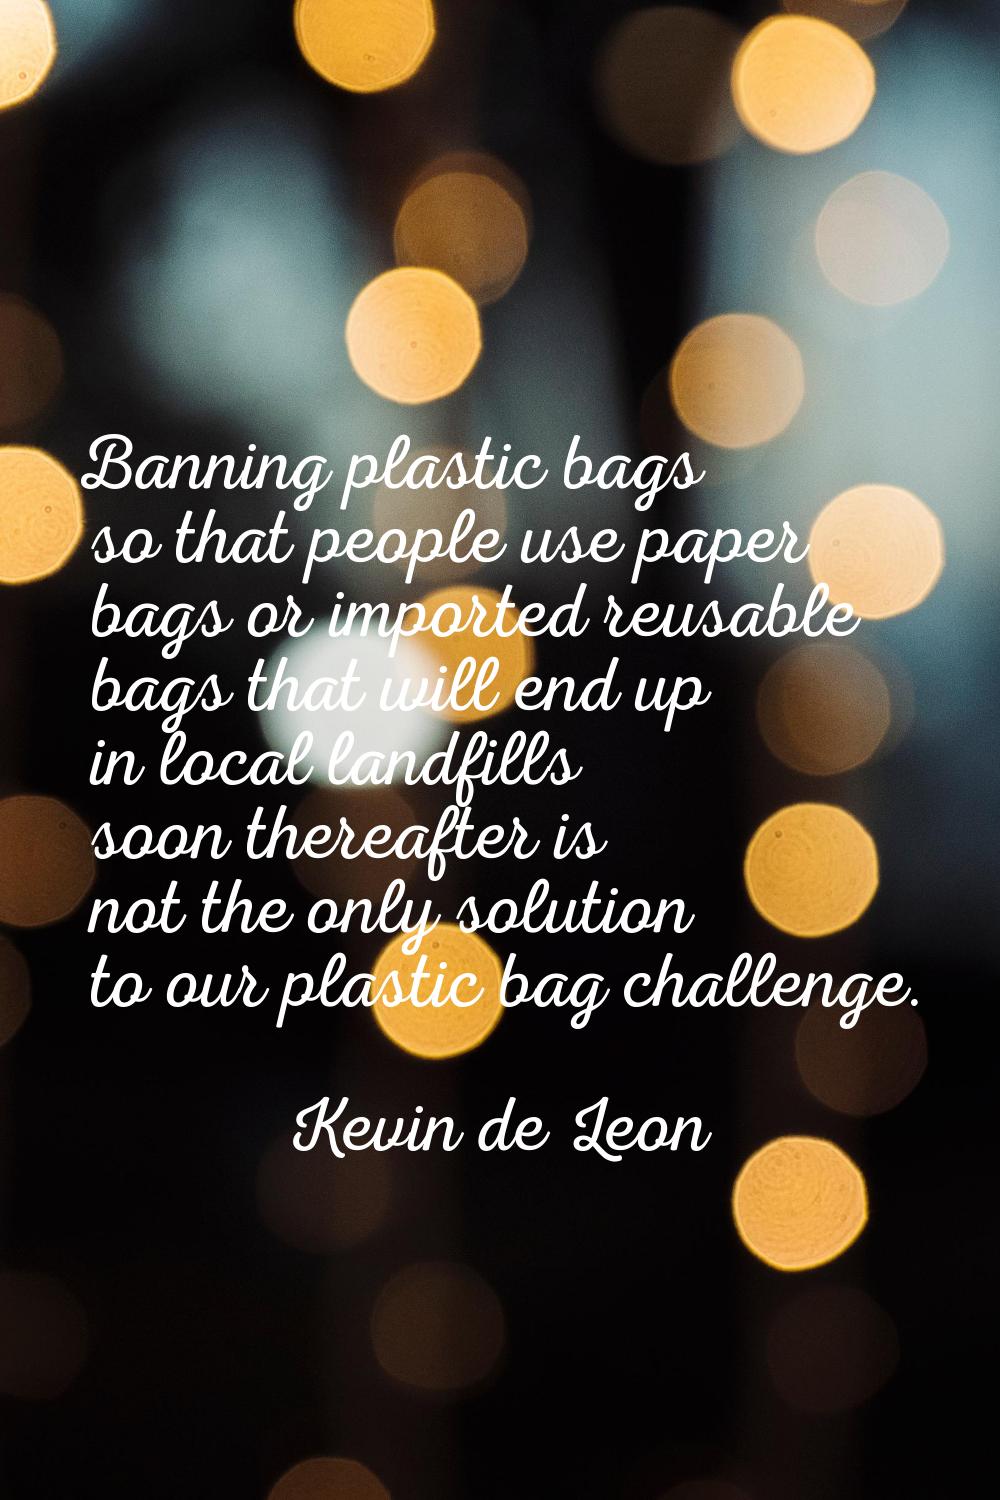 Banning plastic bags so that people use paper bags or imported reusable bags that will end up in lo